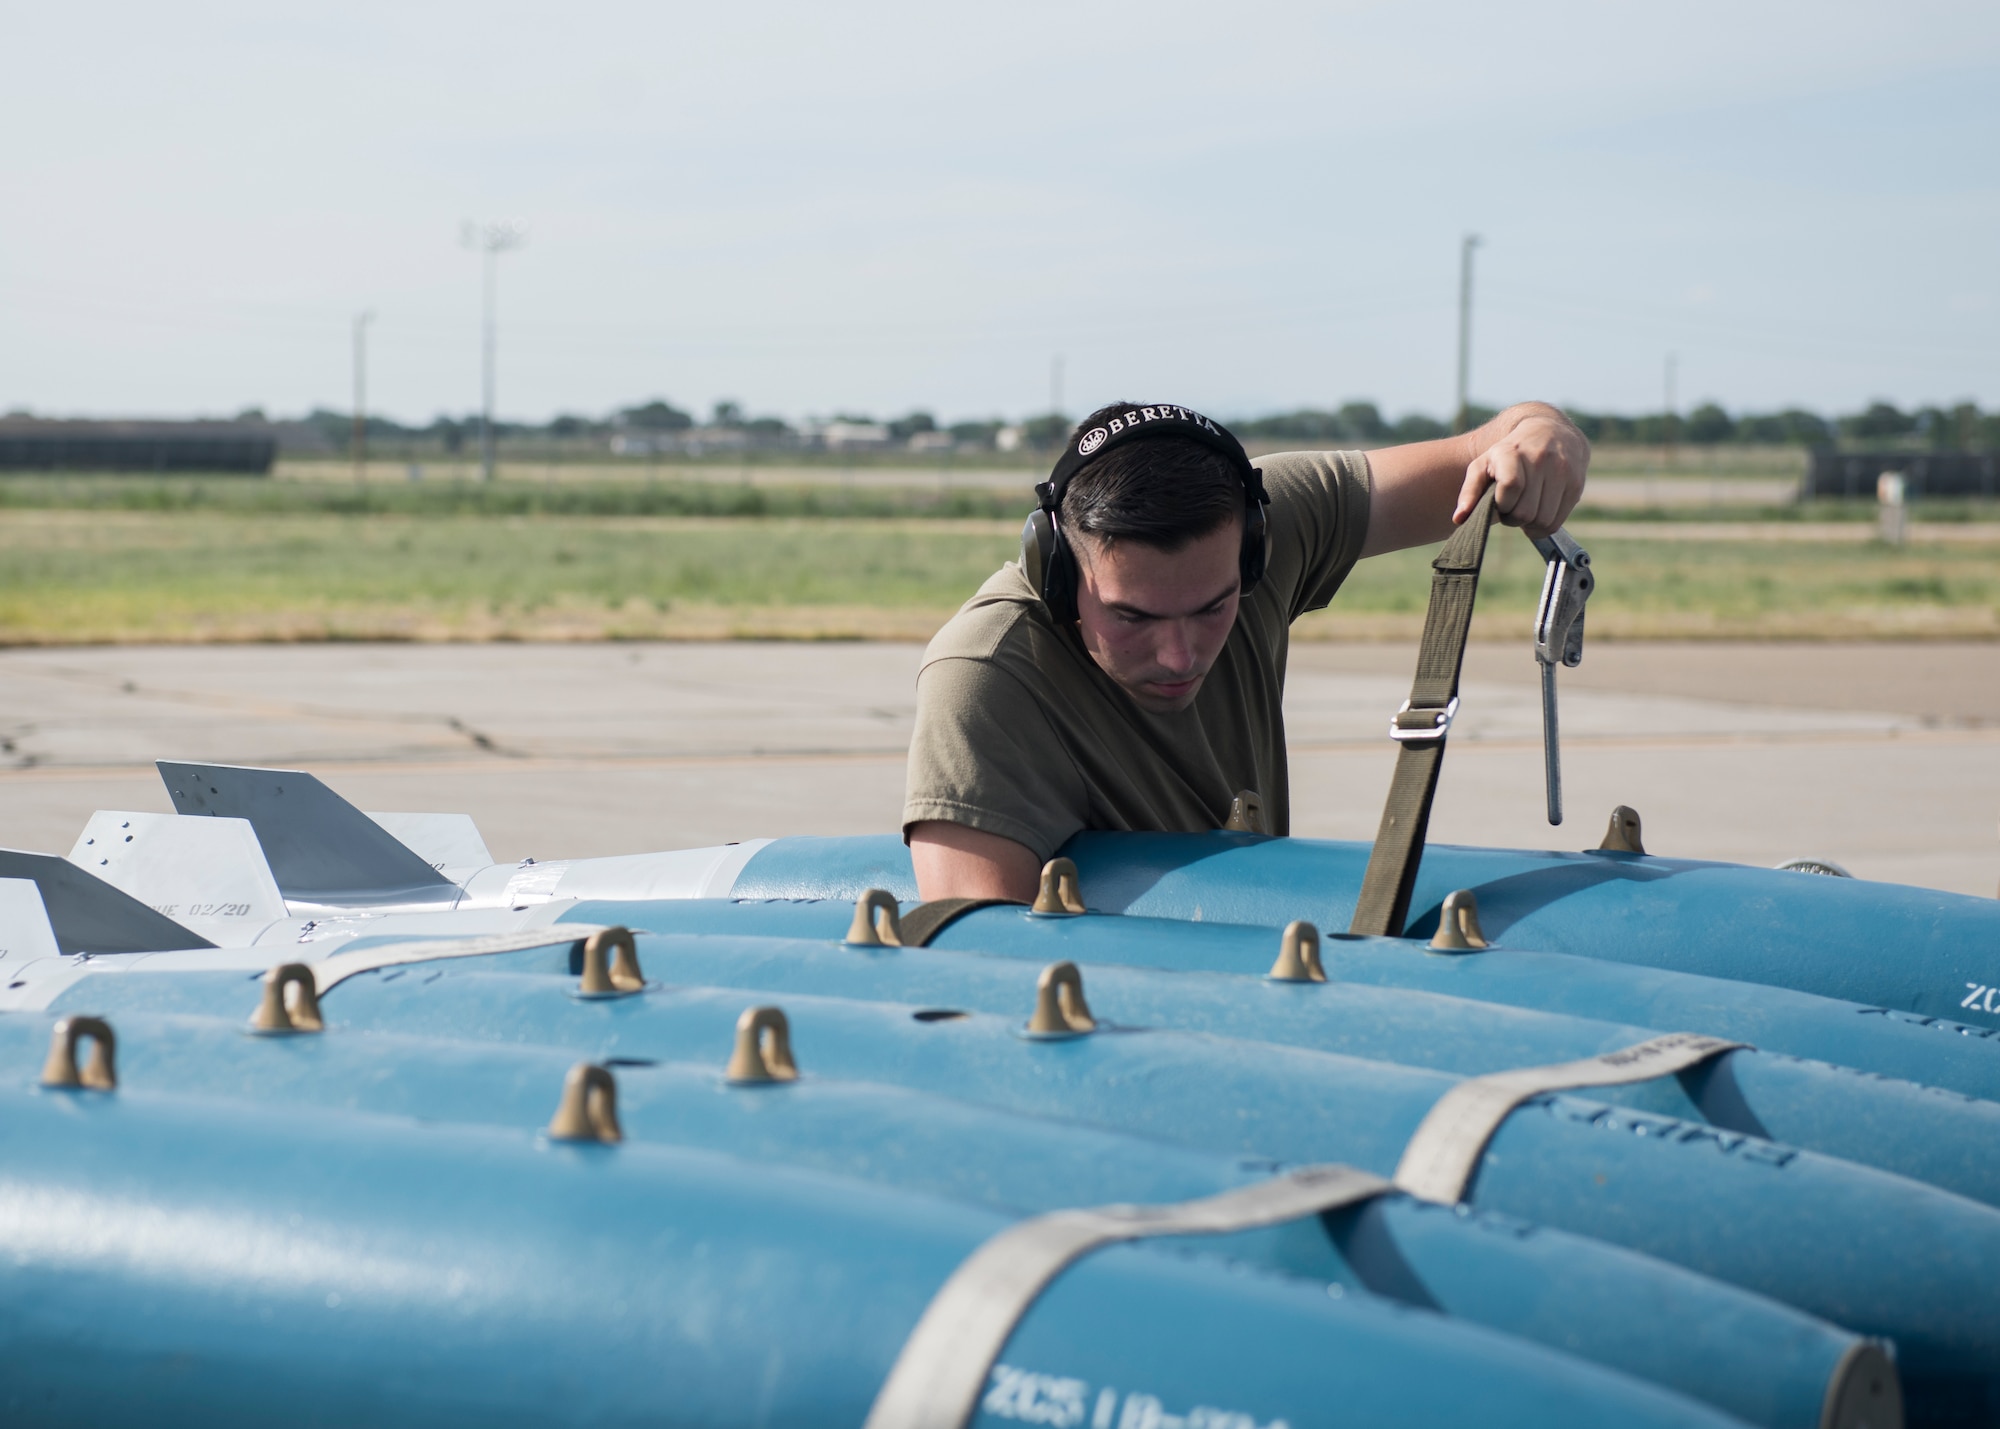 Staff Sgt. Timothy Chouinard, 391st Fighter Squadron, weapopns load crew chief, directs a load of training equipment into an F-15E Strike Eagle during the Adaptive Basing exercise July 17, 2019 at Mountain Home Air Force Base. This training was done in order for the fighter squadrons to sharpen their Adaptive Basing strategies, enhancing it's potential down range. (U.S. Air Force photo by Senior Airman Tyrell Hall)